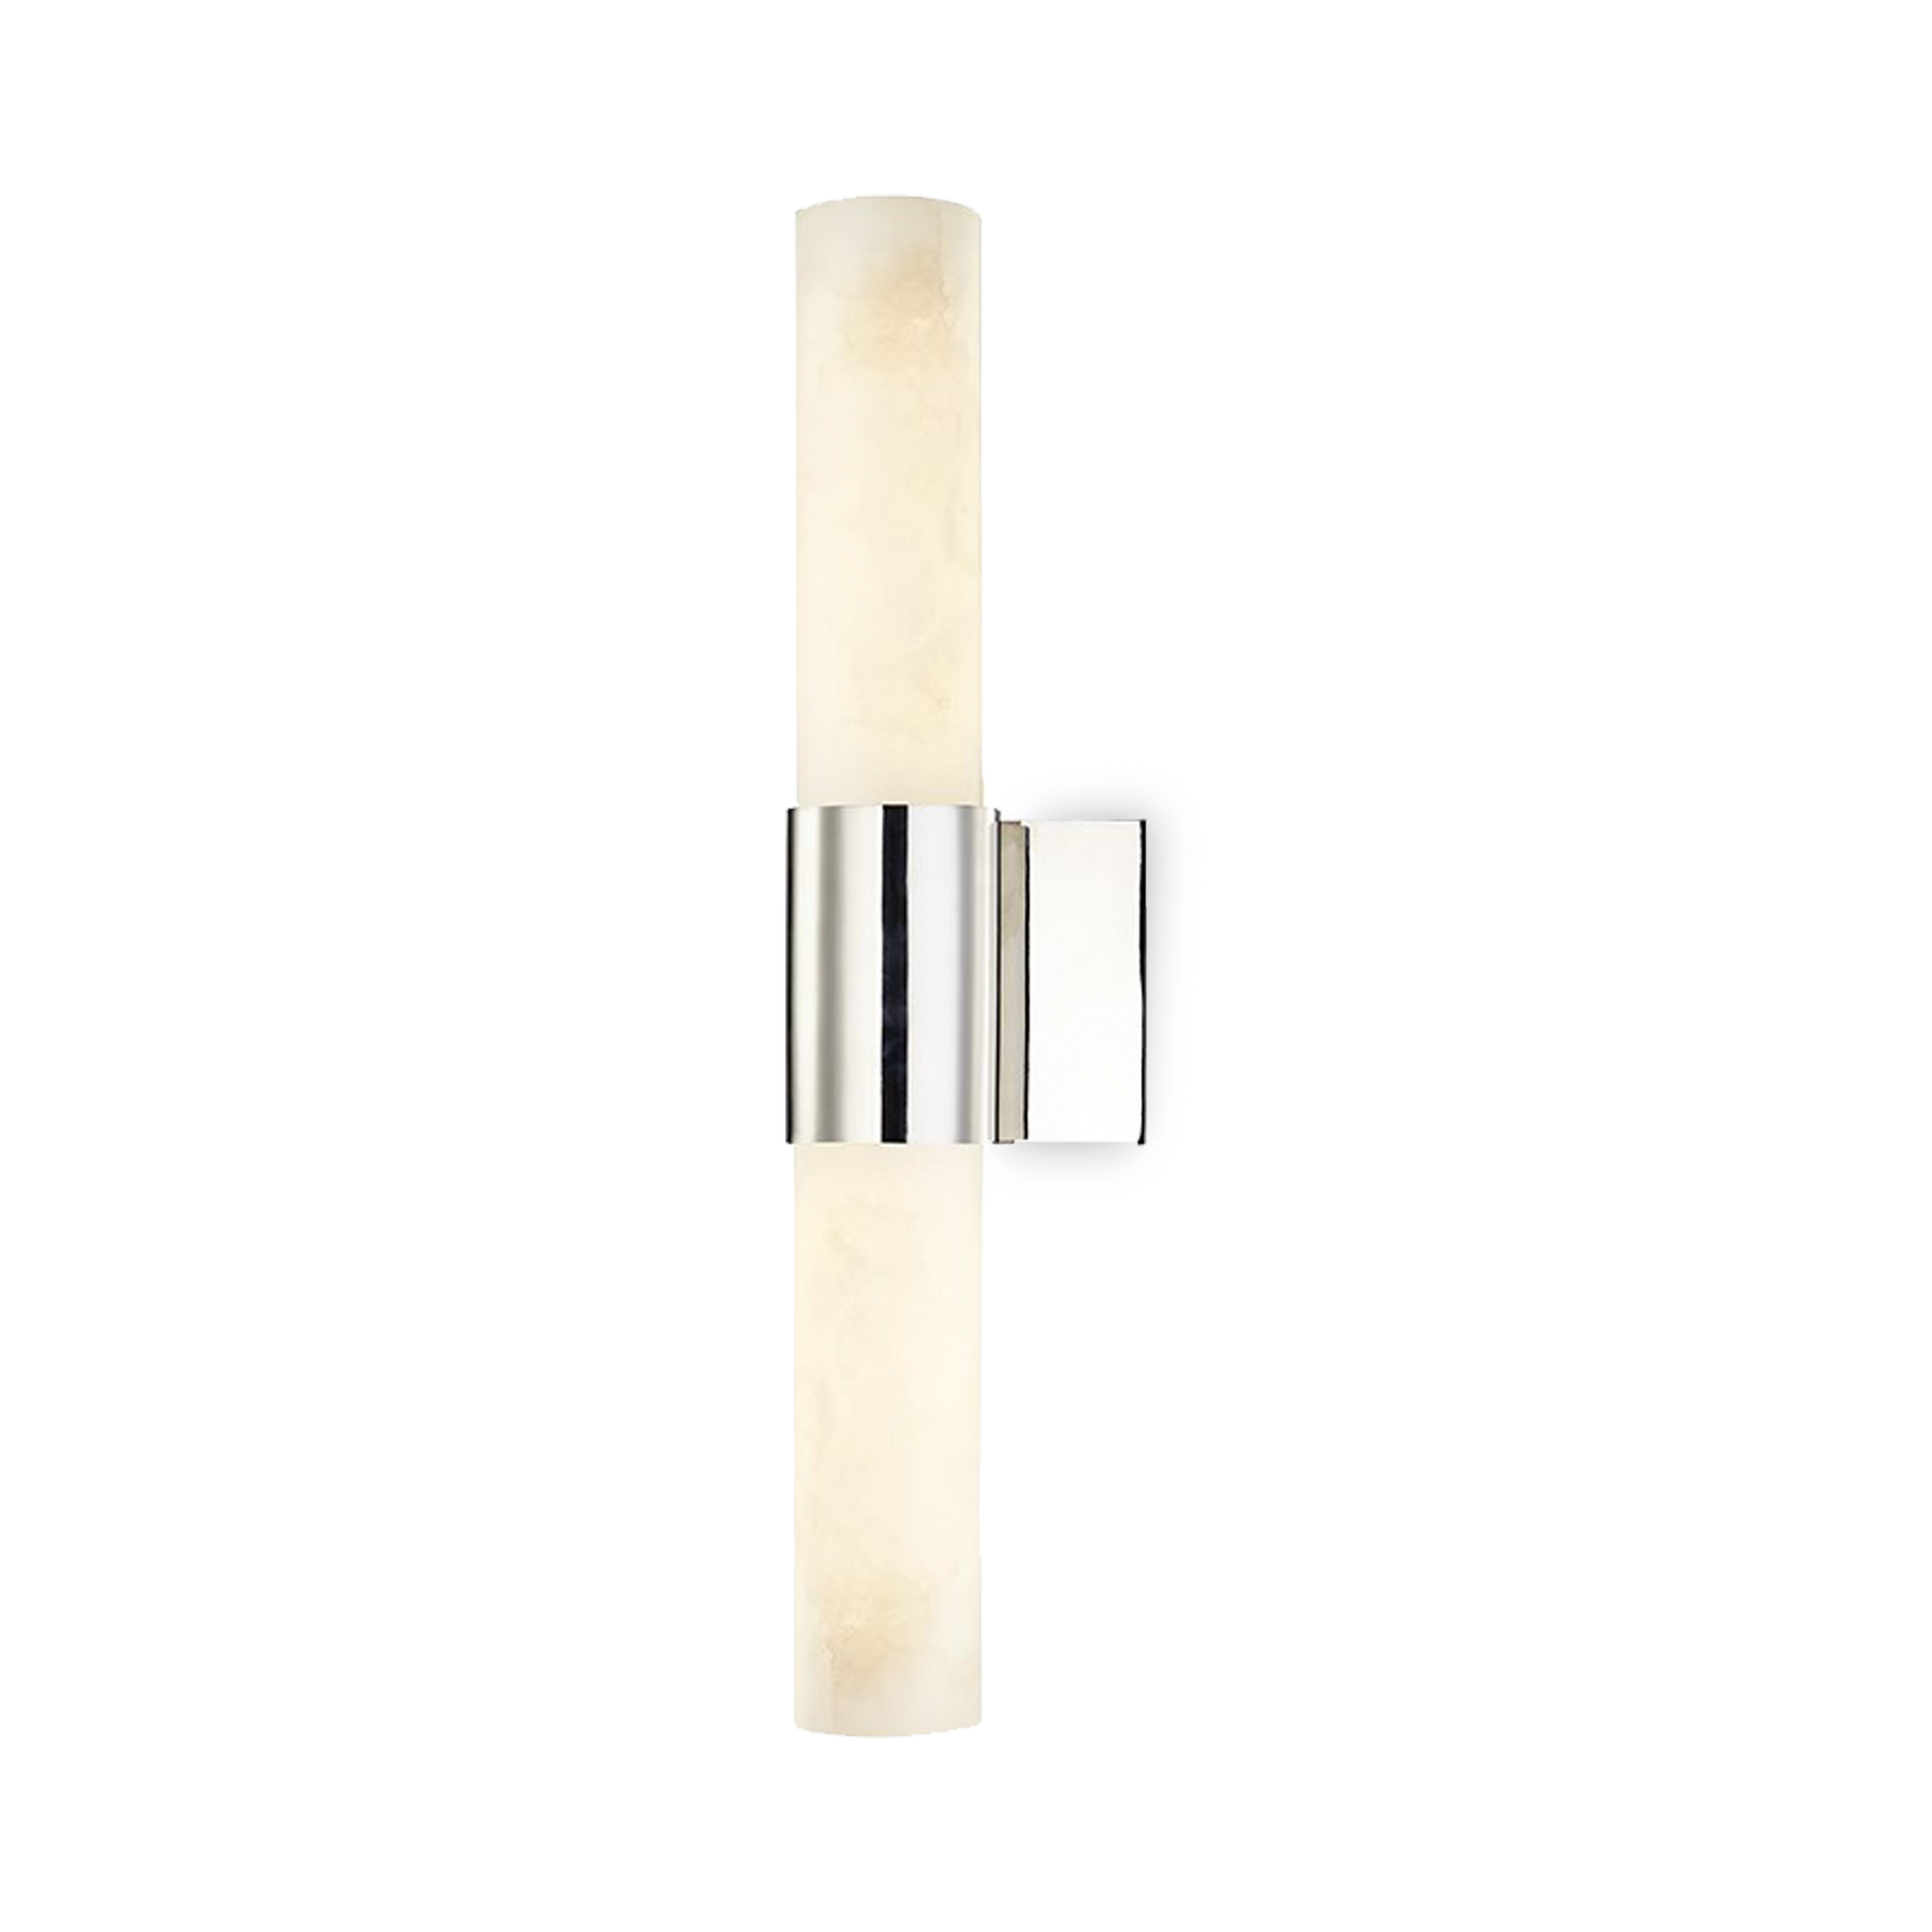 A modern classic, Barkley features two alabaster shades which create soft, warm ambient light, held in place by a chic metal tube finished in polished nickel.